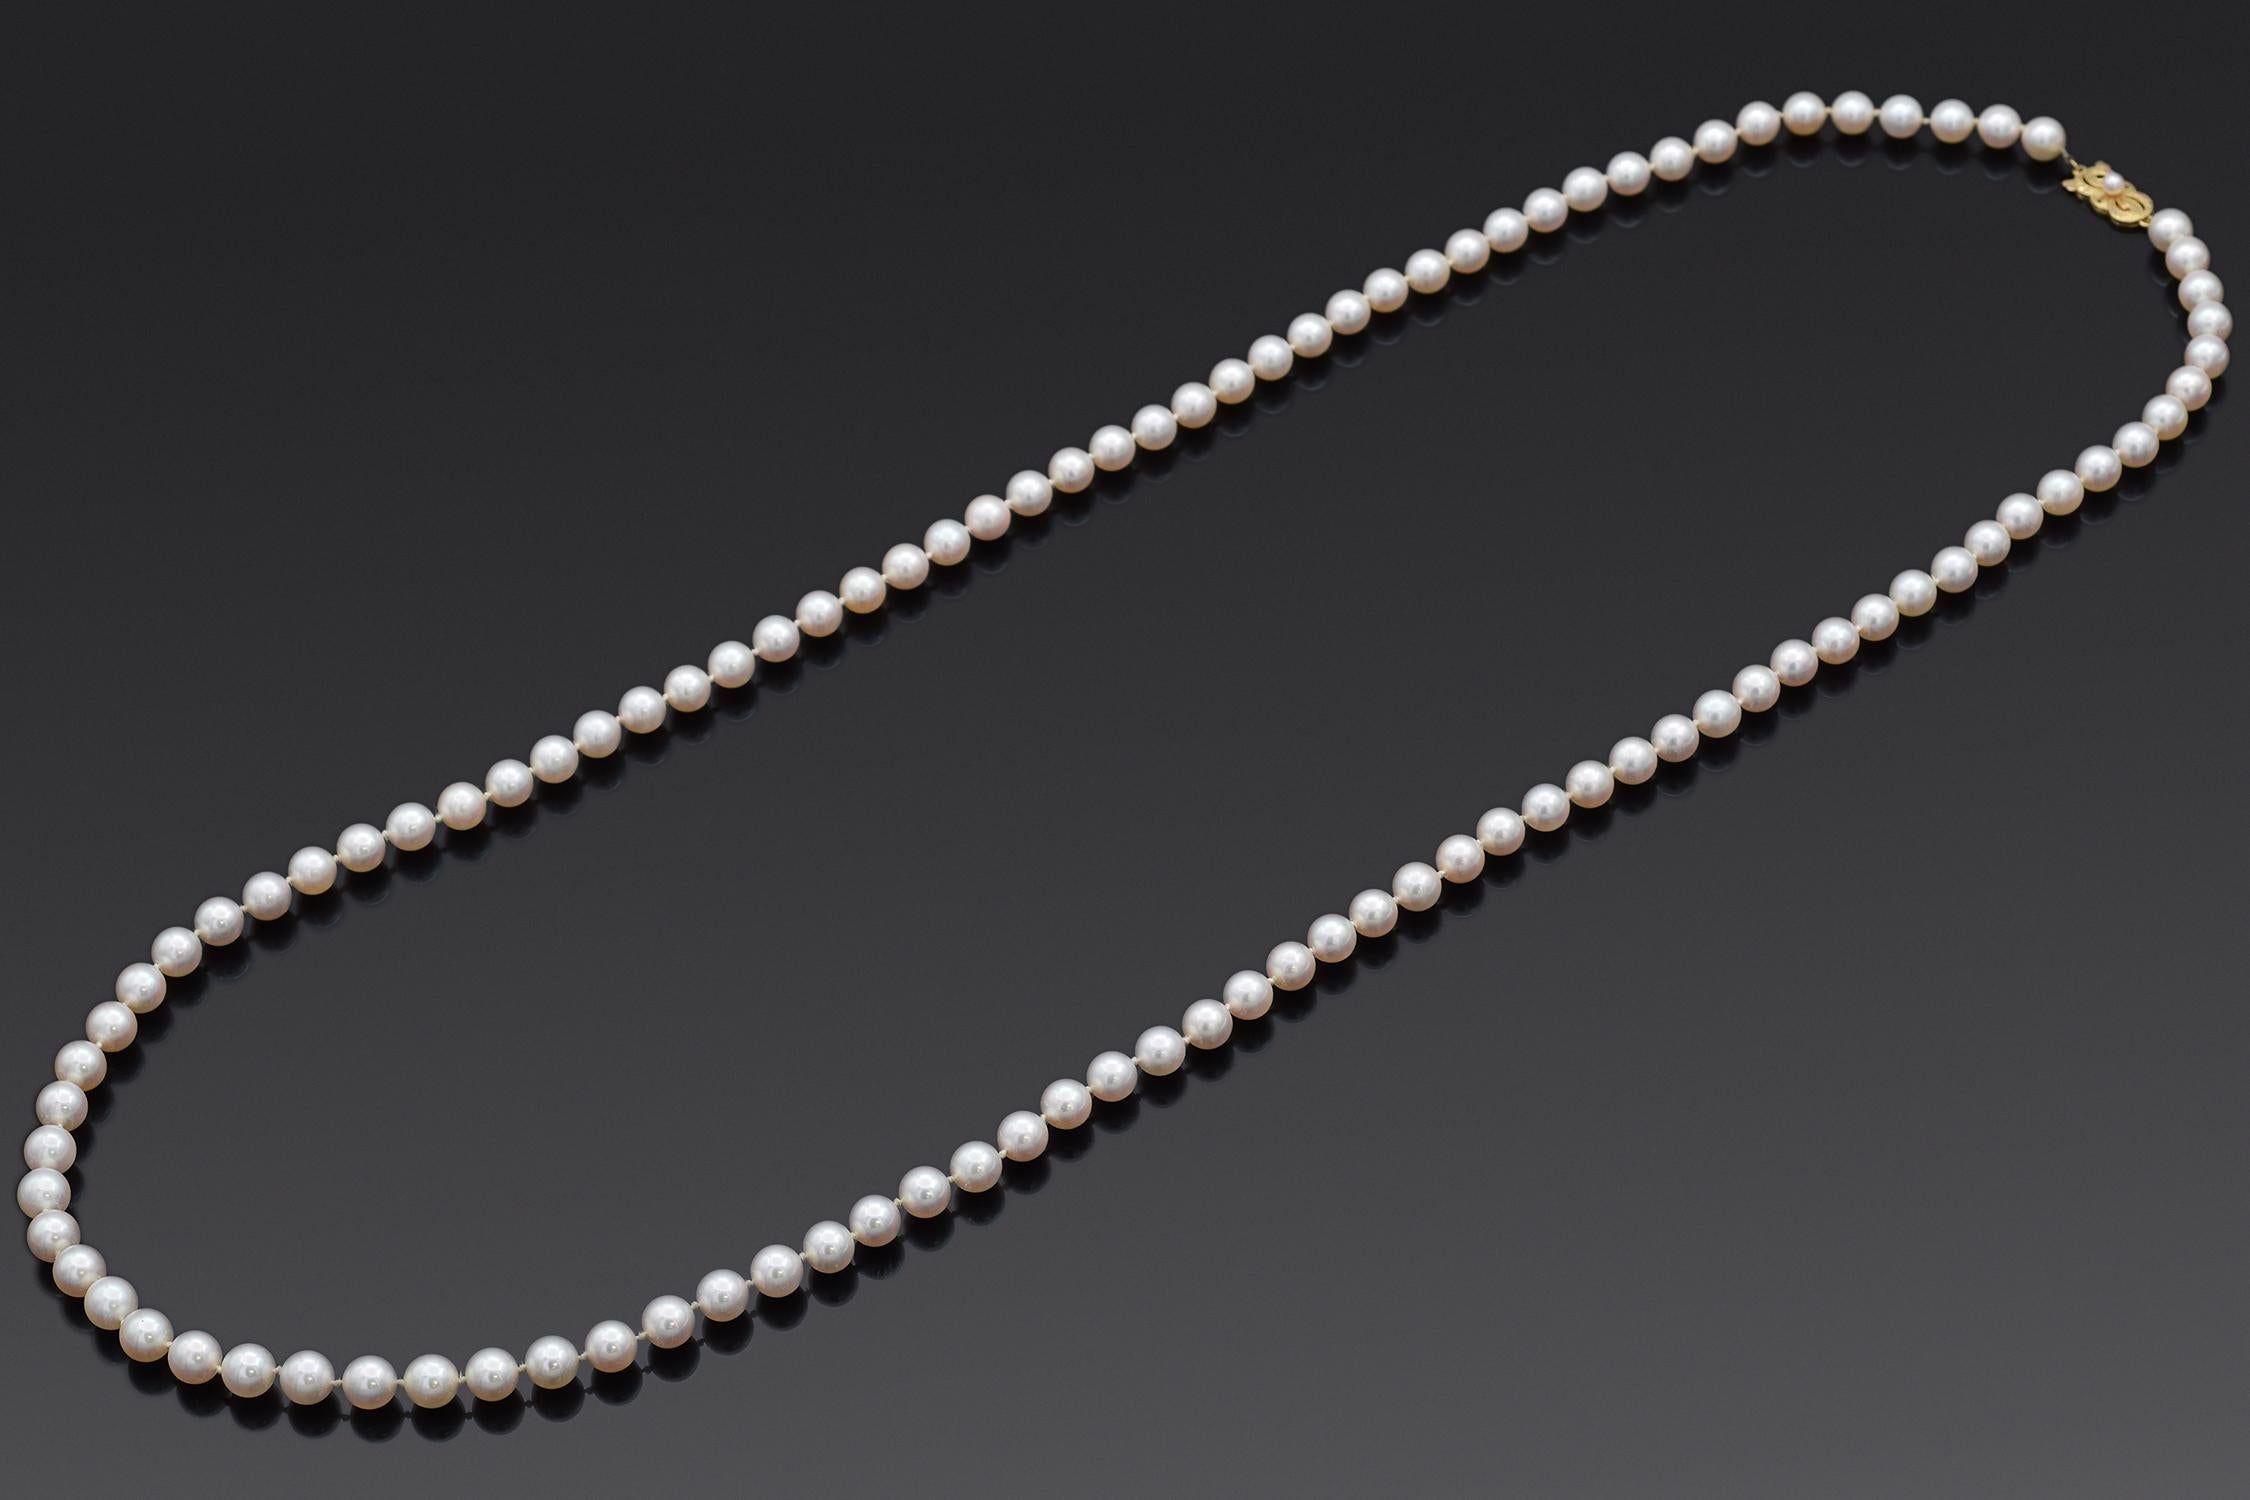 Weight: 68.0 Grams
Stone: Pearl (7.5-8.0 mm) 
Length: 36 Inches
Hallmark: M 750

ITEM #: BR-1067-101023-06